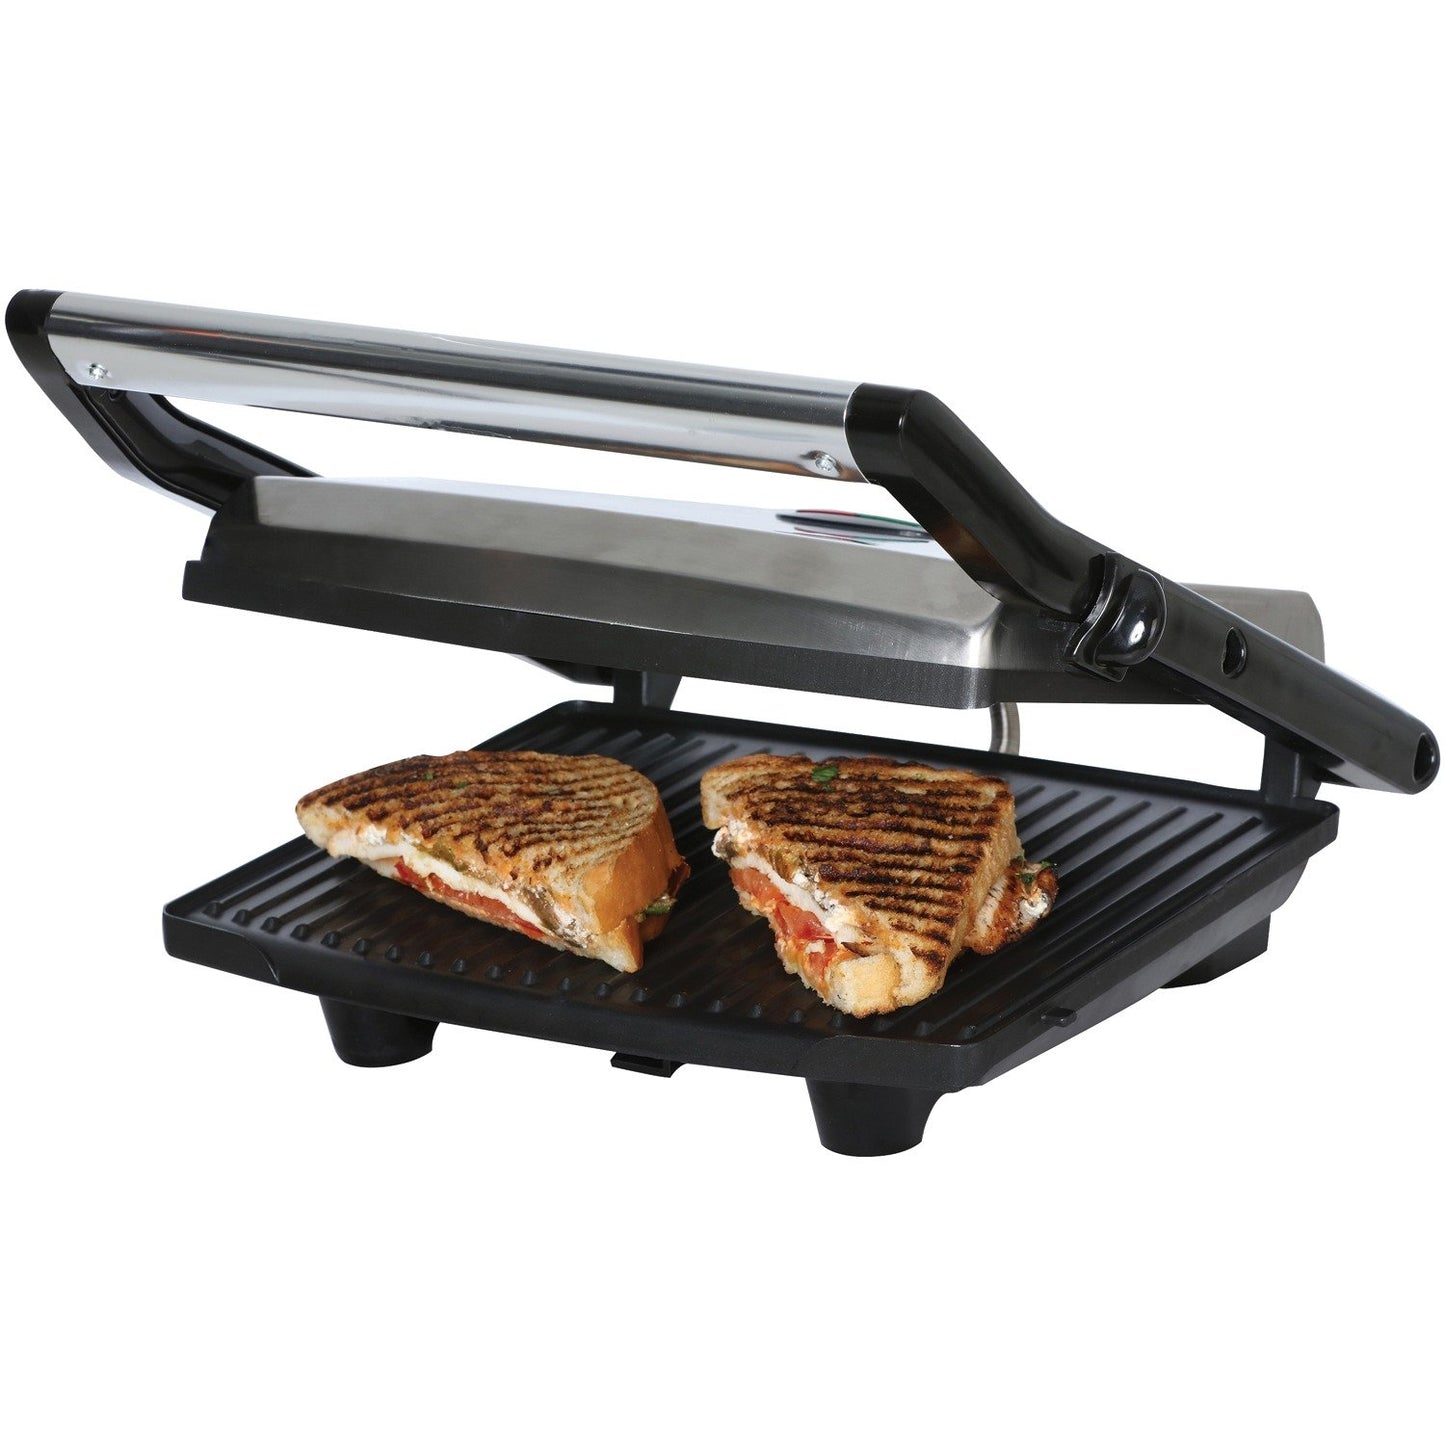 Brentwood Appliances TS-651 Panini/Contact Grill